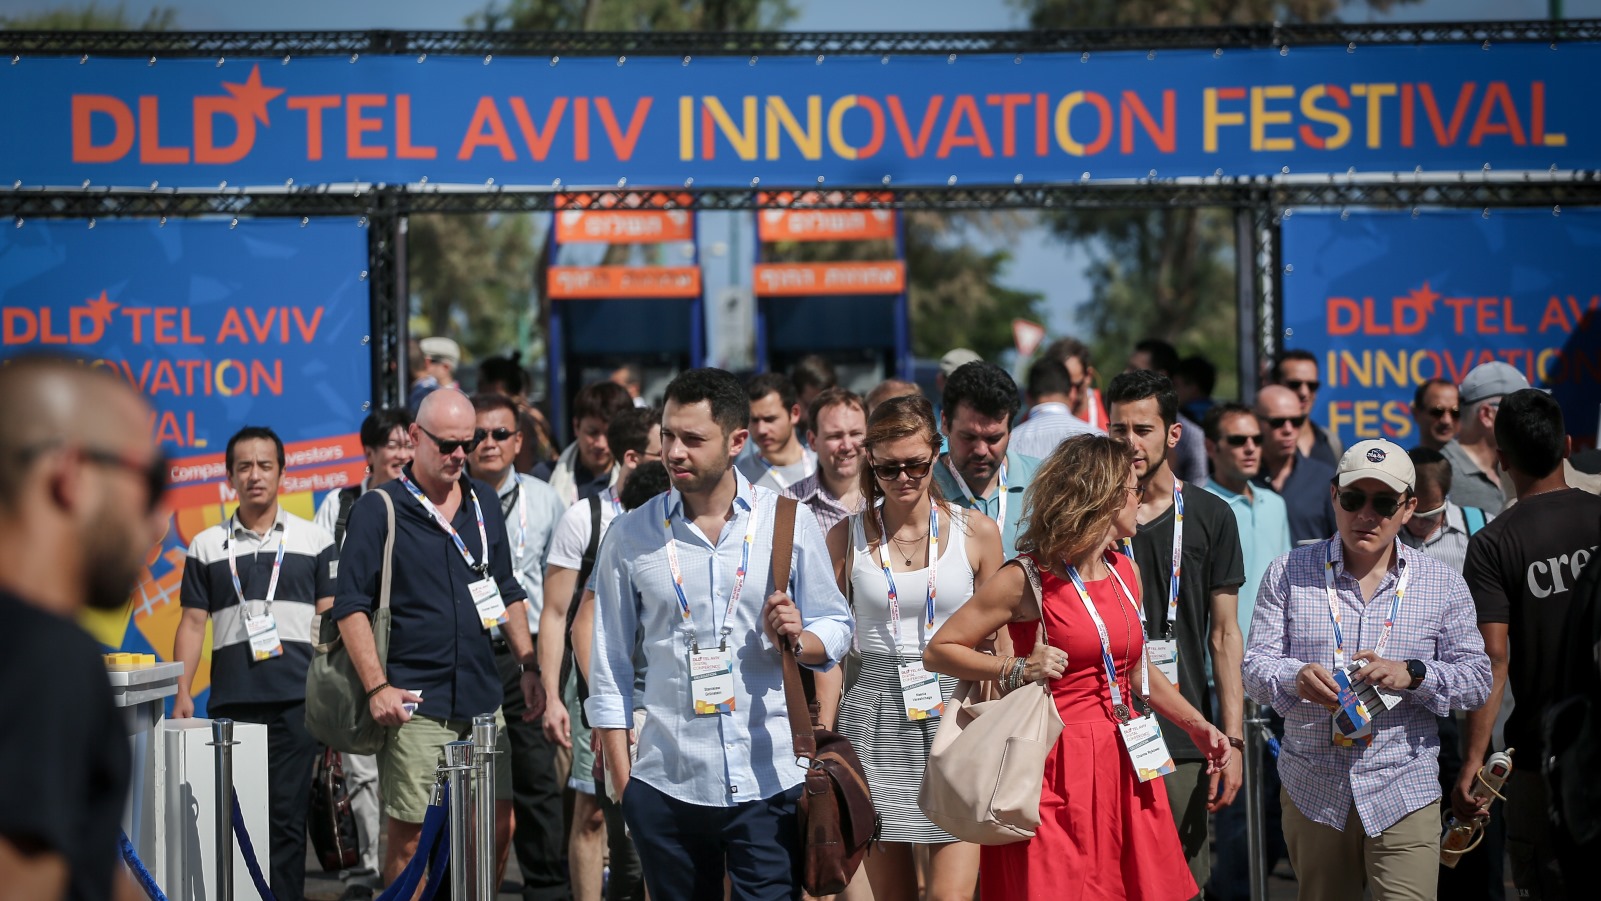 Participants at the DLD Tel Aviv Digital Conference at the Old Train Station complex in Tel Aviv,eptember 6, 2017. Photo by Miriam Alster/FLASH90